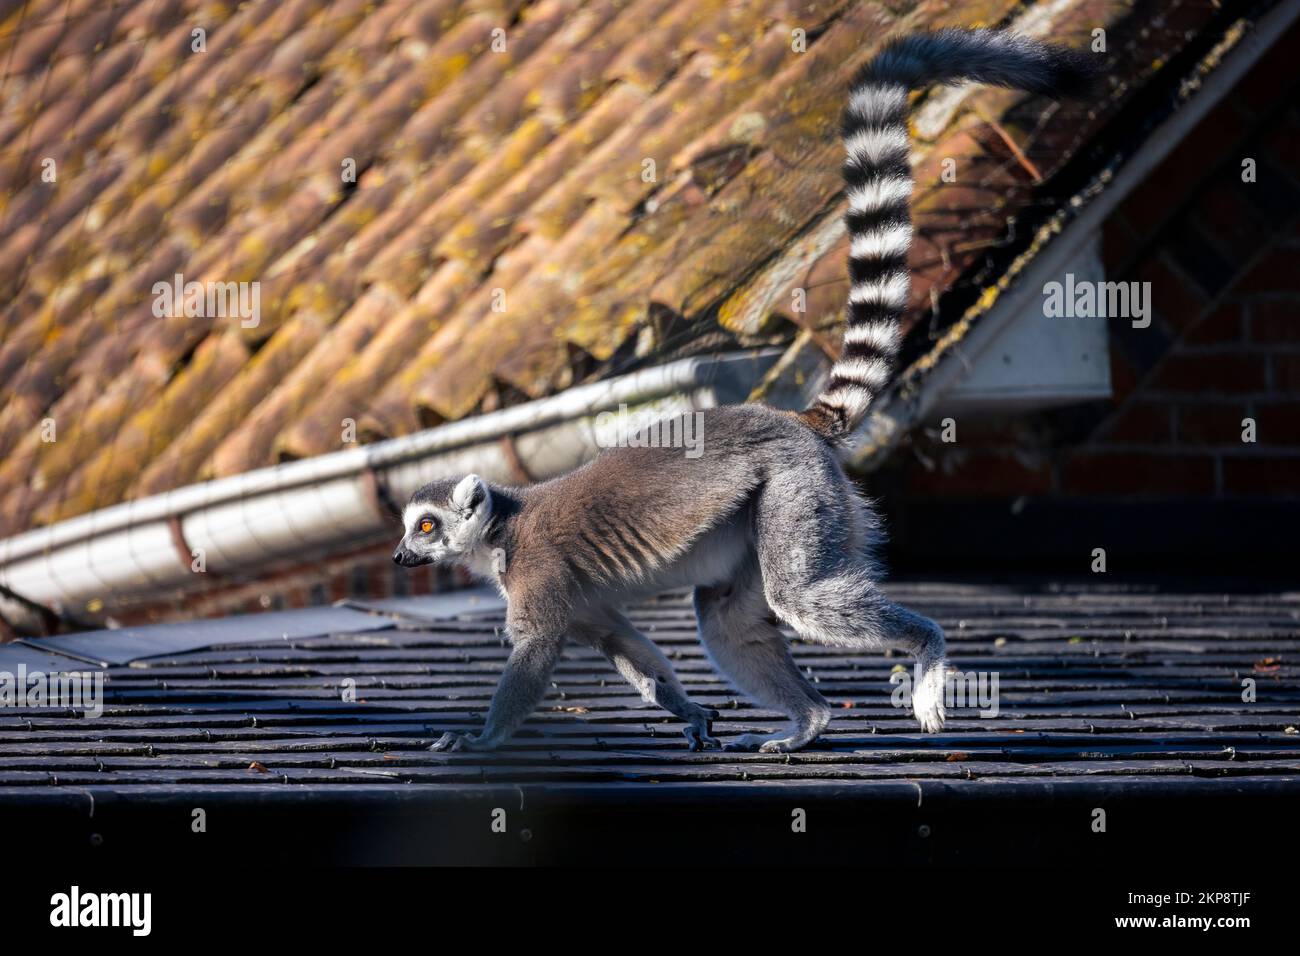 A lemuridae walking on the rooftop of a building Stock Photo